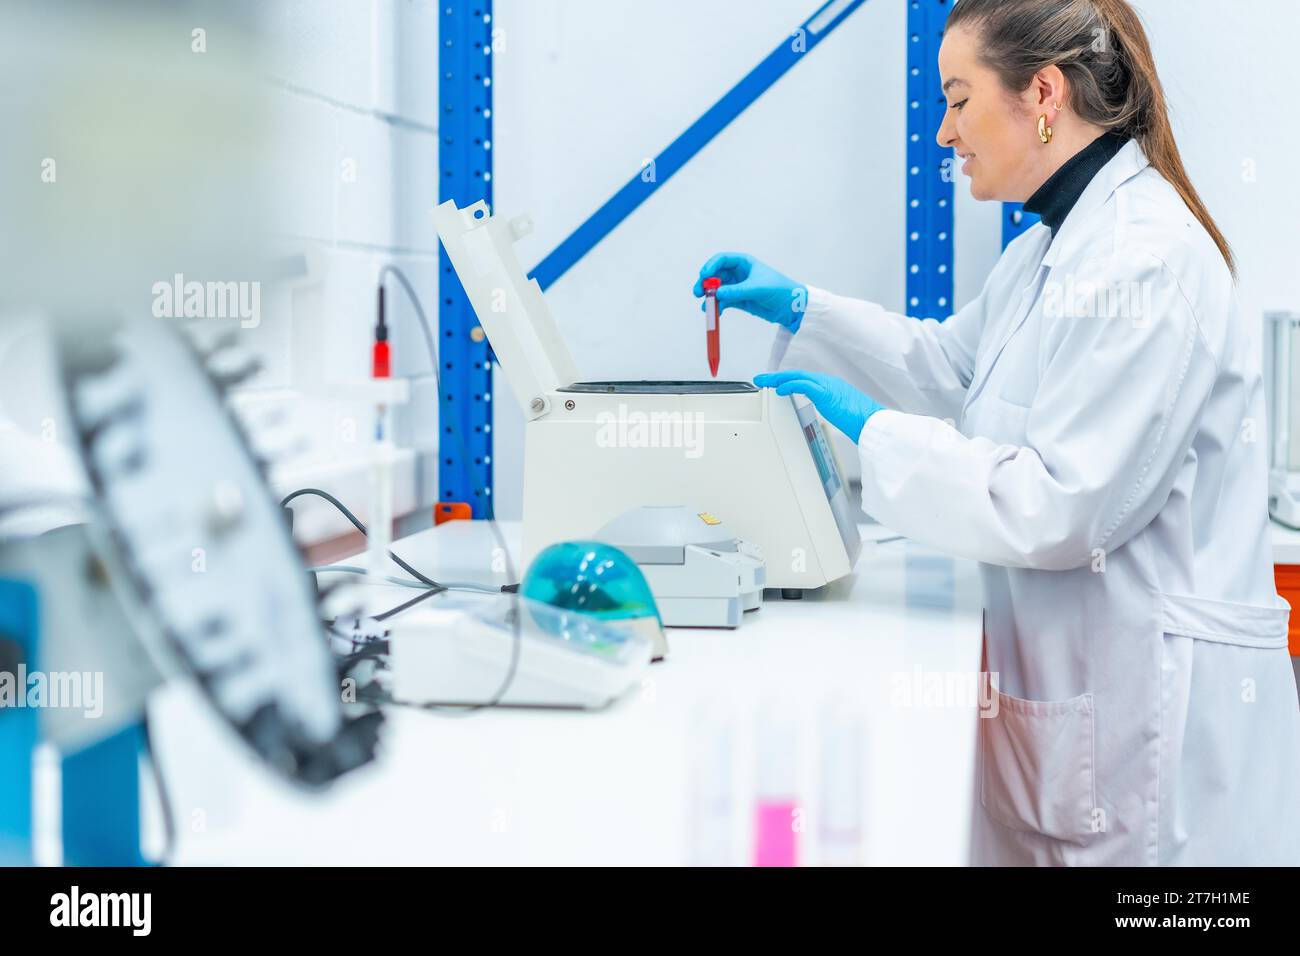 Side view of a smiling scientist placing a blood sample in a centrifuge in a research laboratory Stock Photo